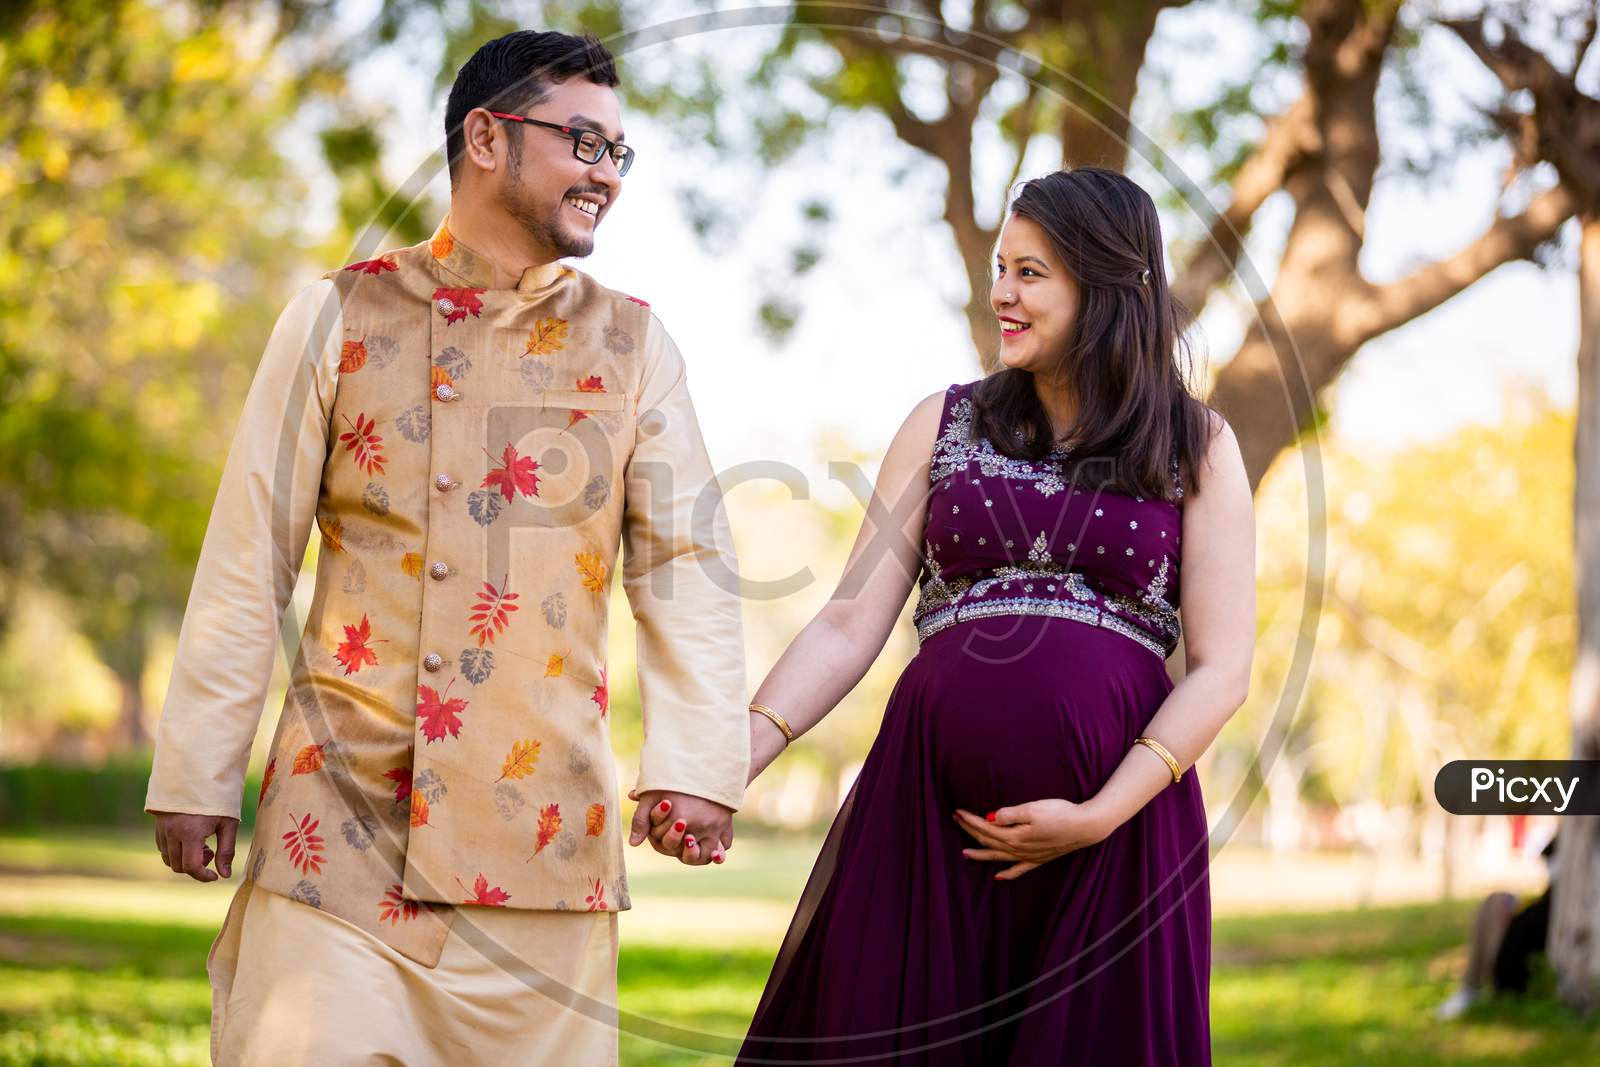 Happy Asian Indian Pregnant Woman With Her Husband Walking Outdoor In A Park Or Garden, Smiling Cheerful Young Parents Looking At Camera Expecting Baby.